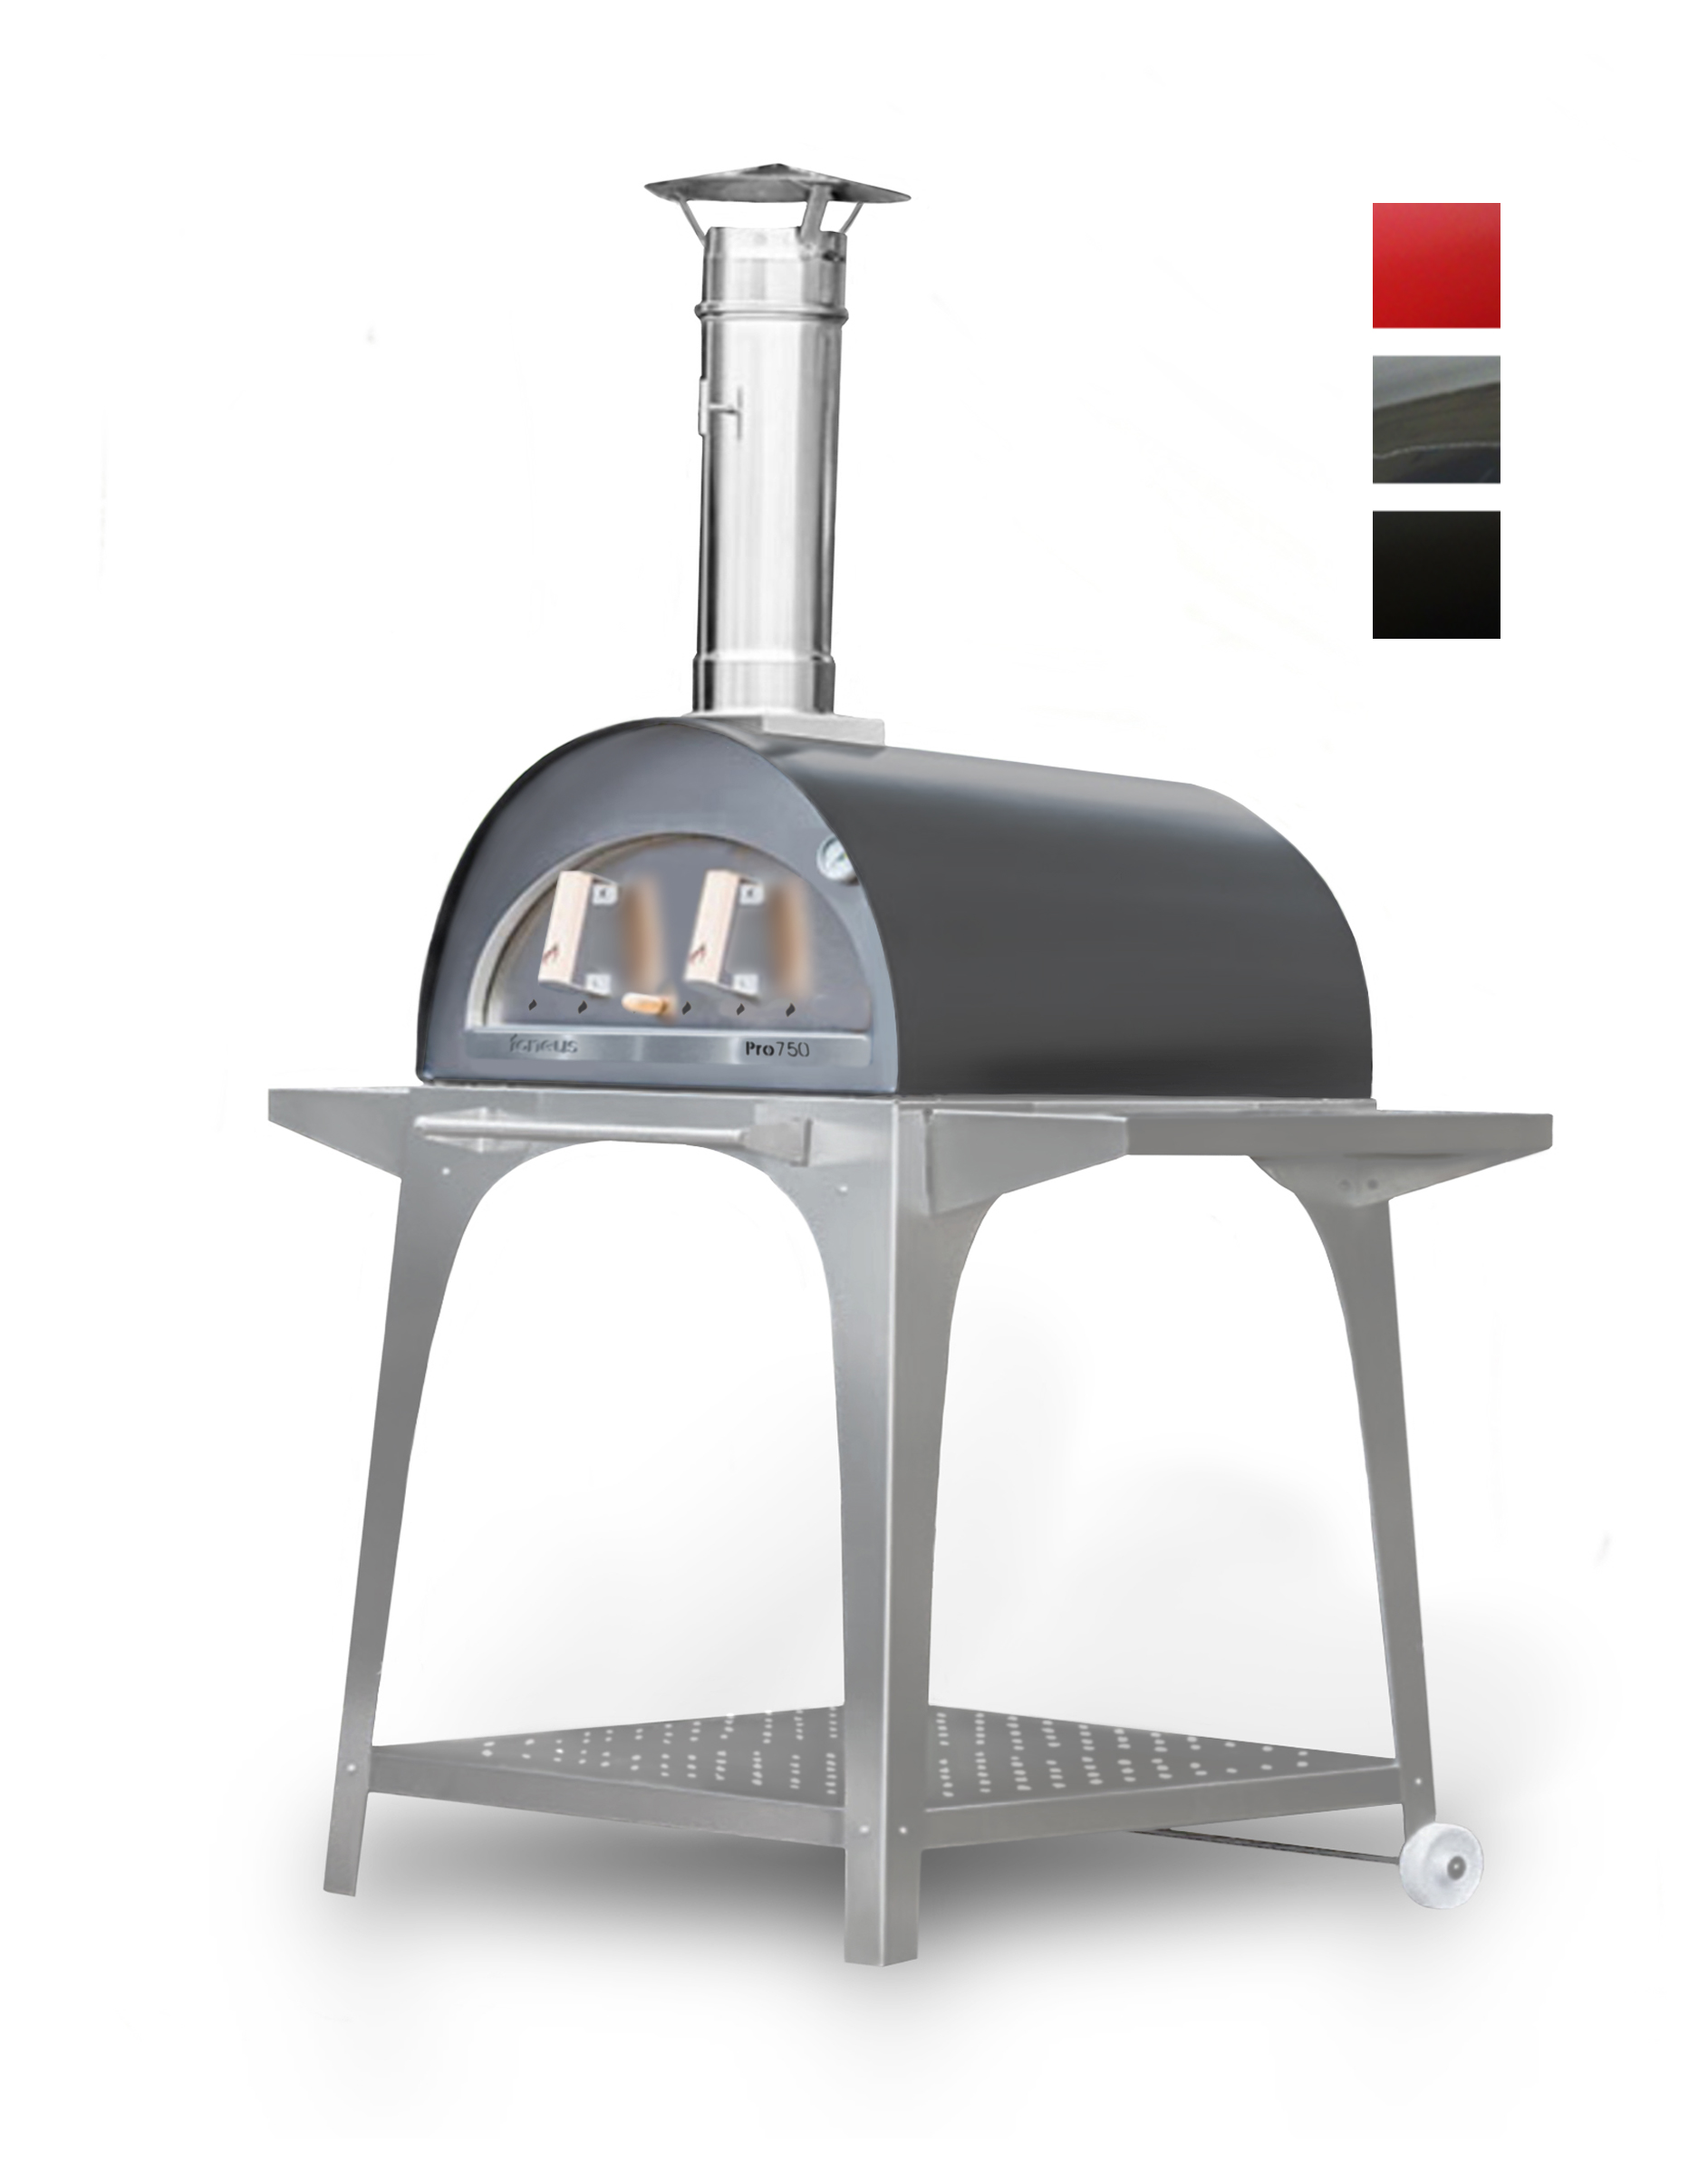 Igneus Pro 750 pizza oven with stand